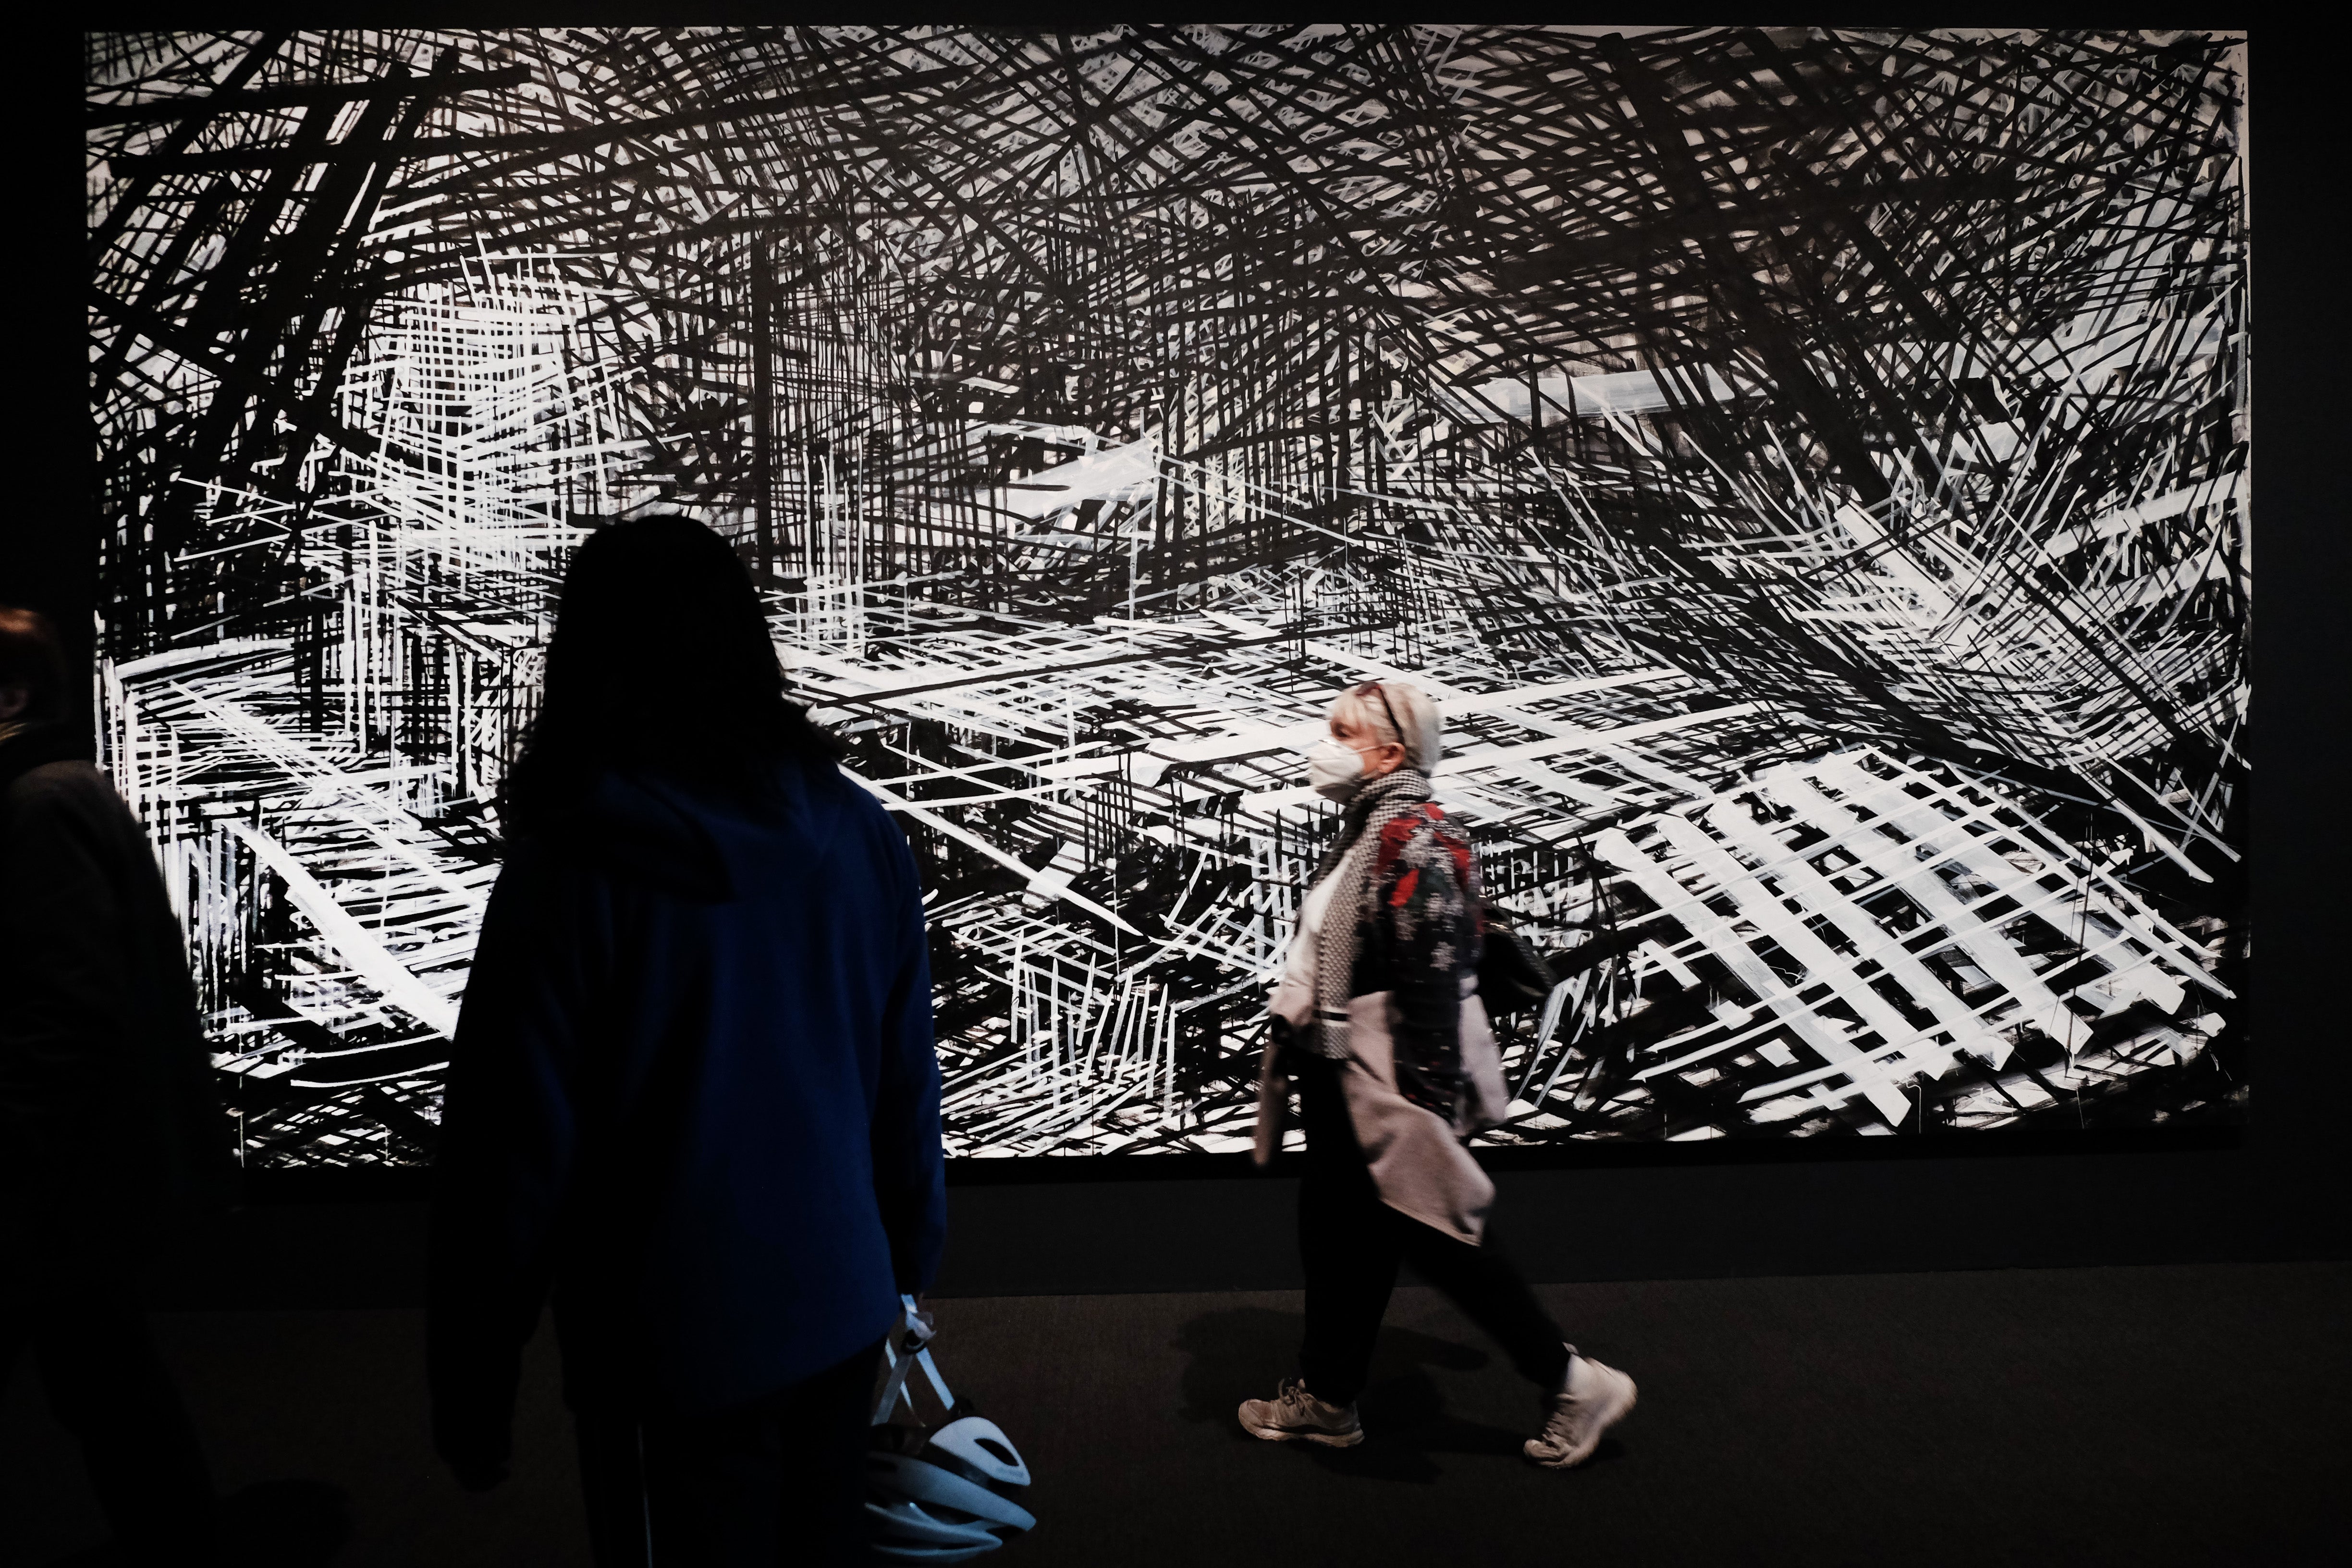 A work by artist Denyse Thomasos is displayed as people walk through the Whitney Biennial show at the Whitney Museum of Art on 6 April 2022 in New York city